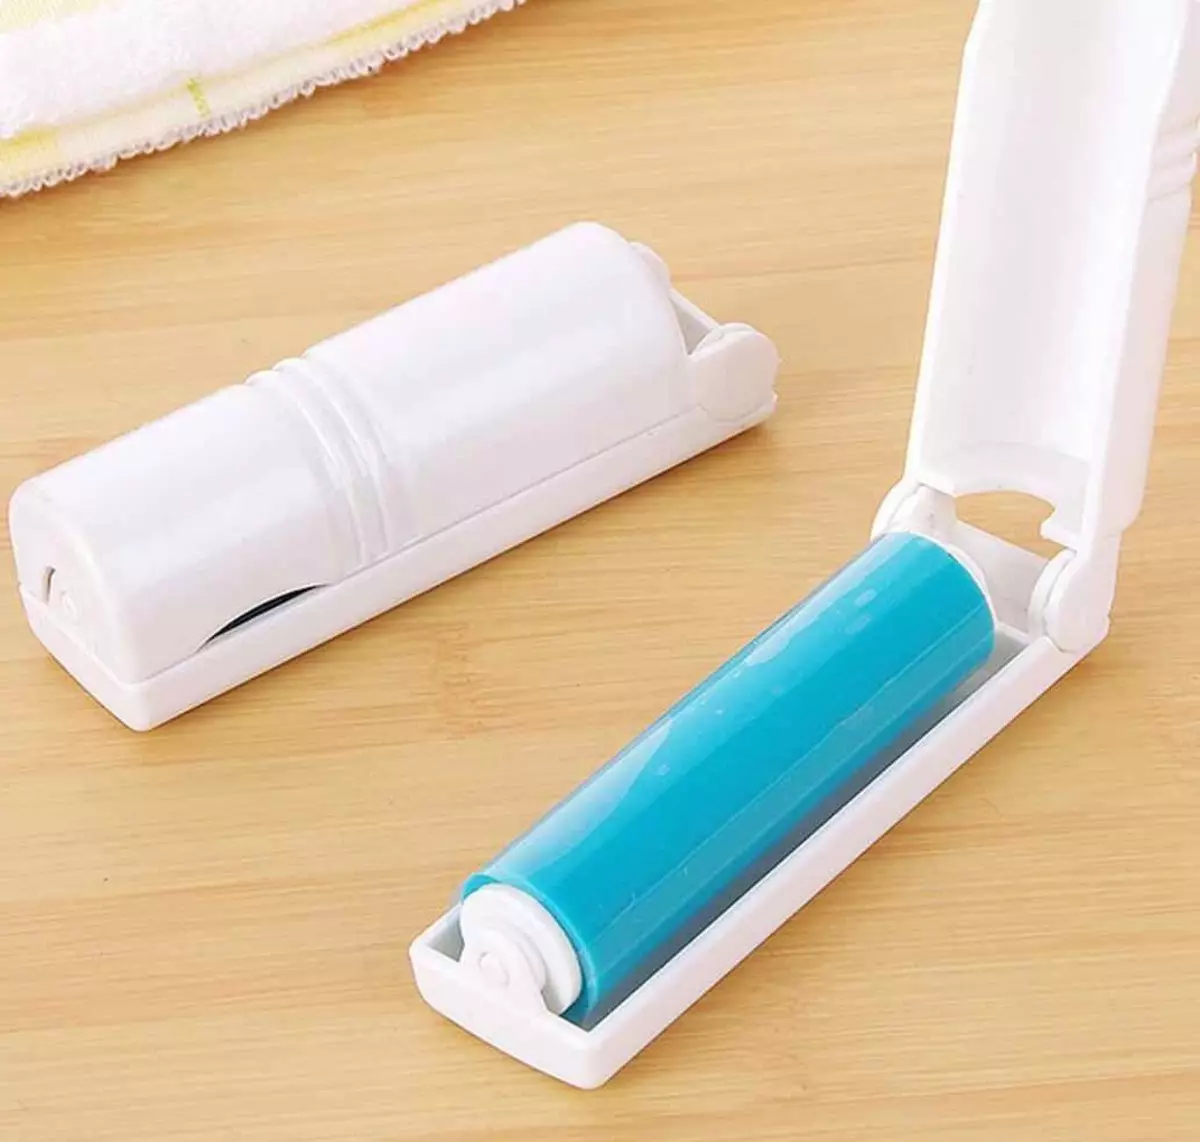 Clotting rollers: sticky reusable silicone washable rollers and replaceable models for cleaning clothes from wool. How to use them? 11254_20